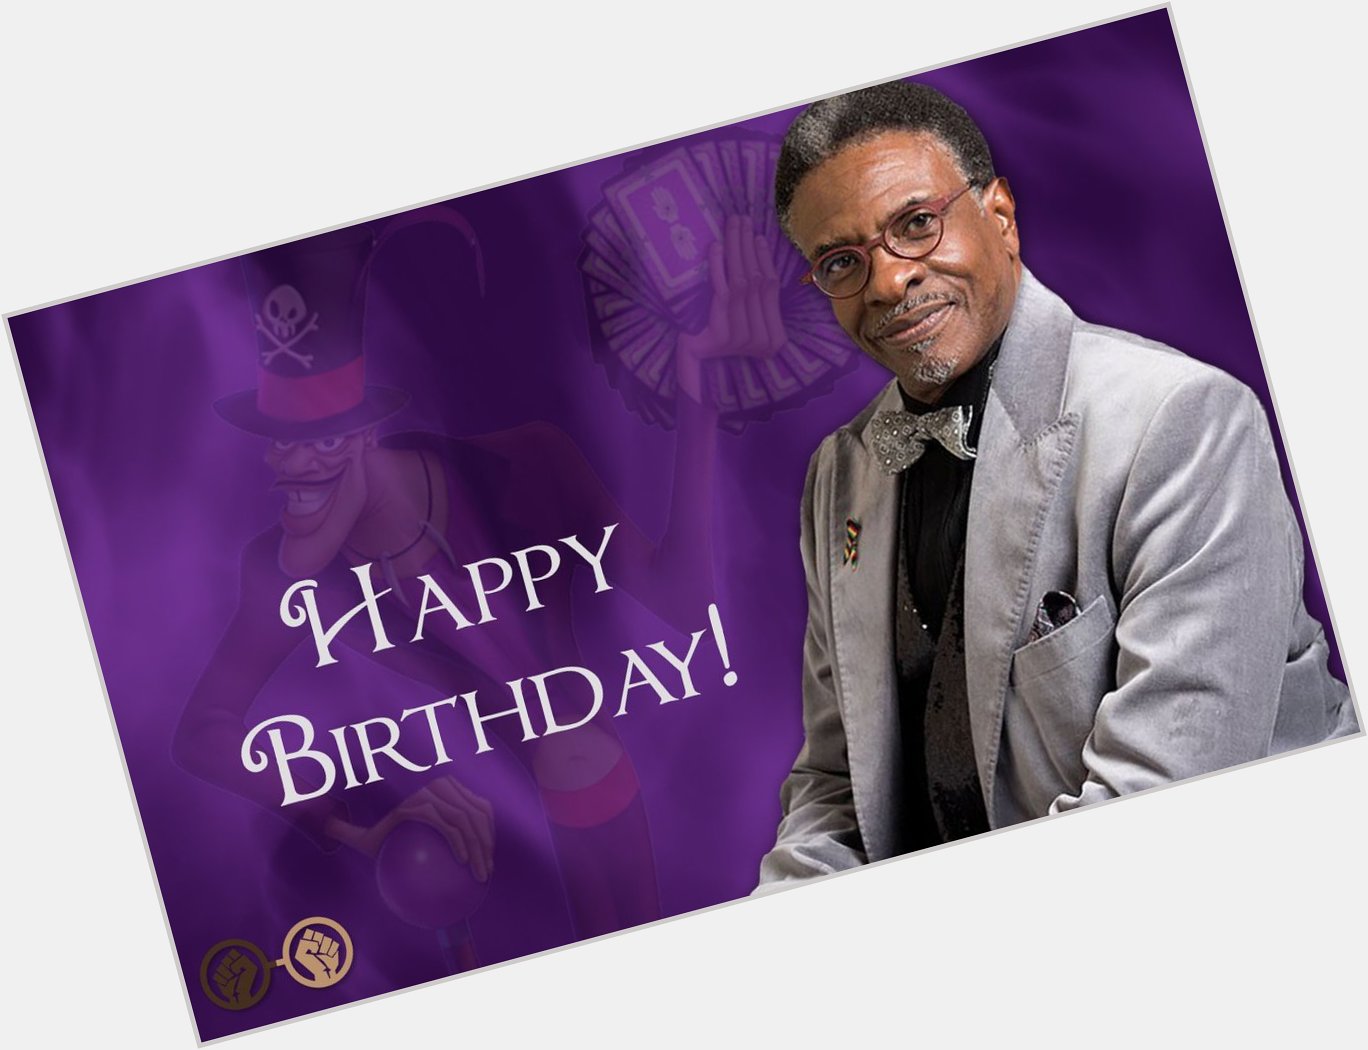 Happy Birthday to Keith David! The \Princess and The Frog\ and \Gargoyles\ voice actor turns 62 today! 